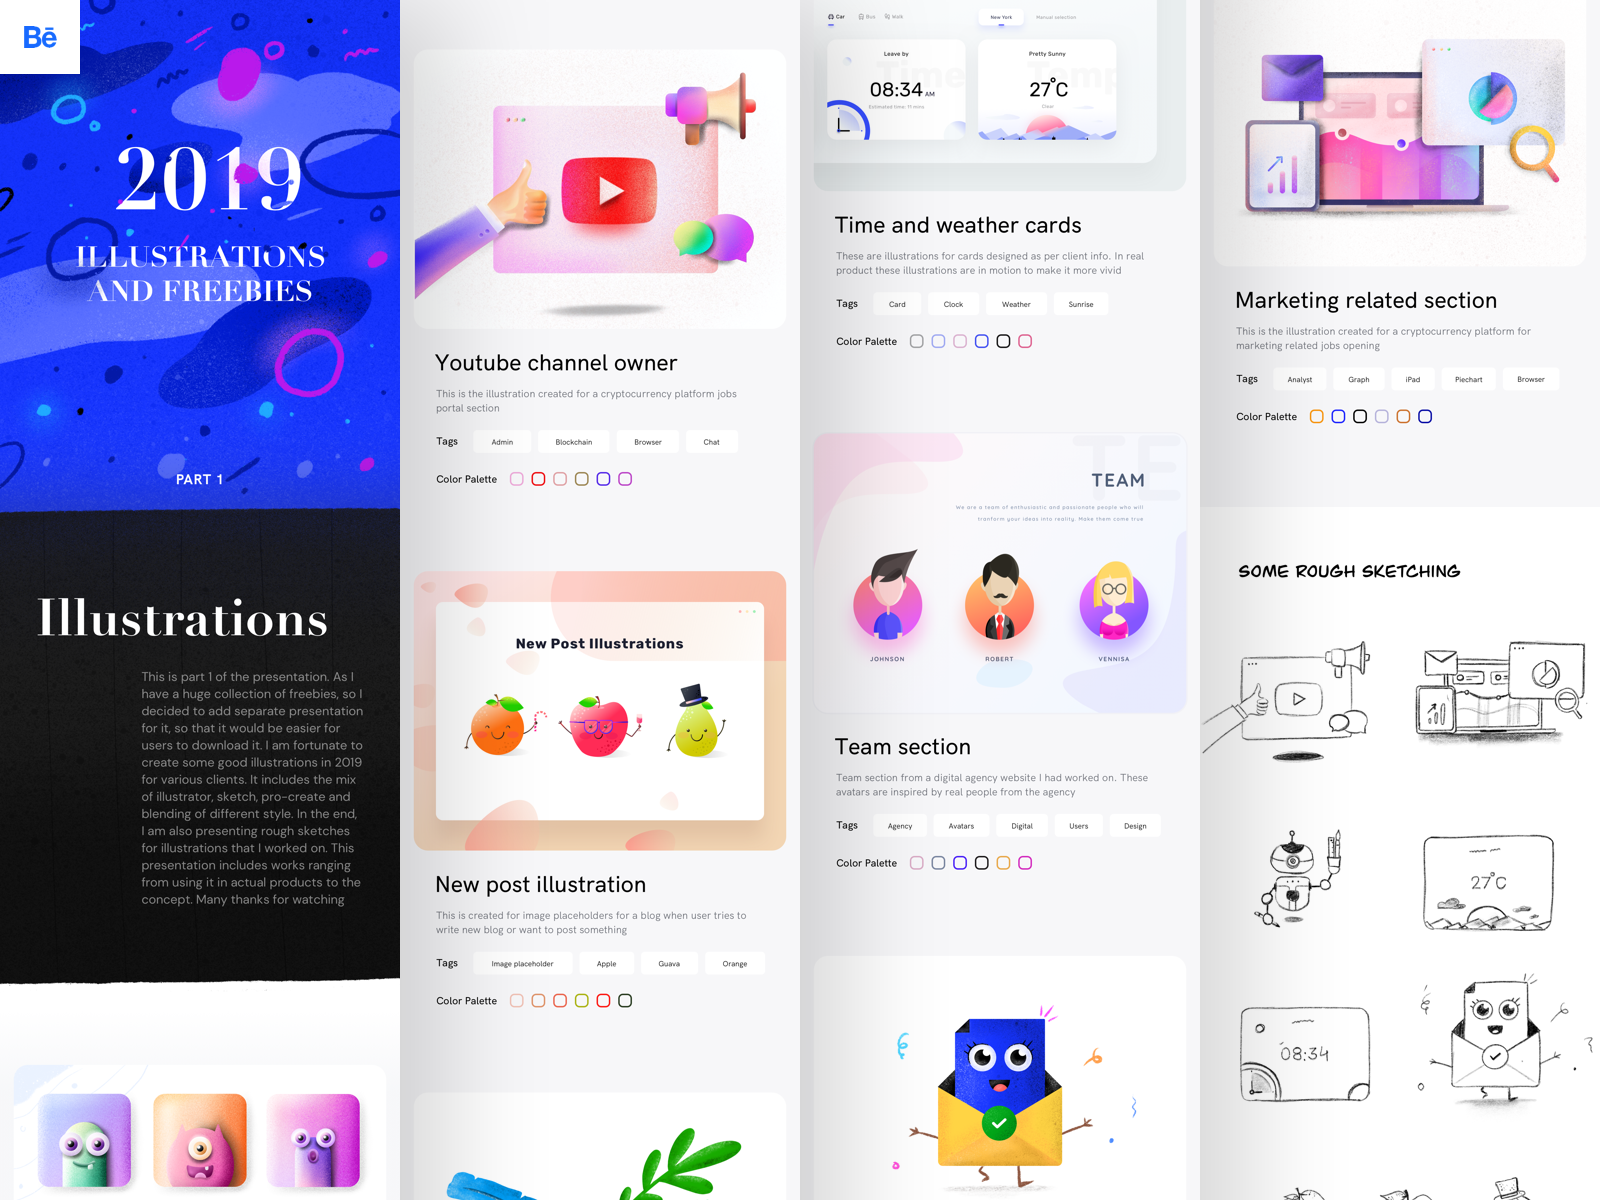 2019 Illustrations and freebies Part 1 2019 design trend 2019 illustrations adobe avatars color palette email freebie illustration illustrator image mascot neel prakhar profile picture sharma sketch source tab bar xd youtube